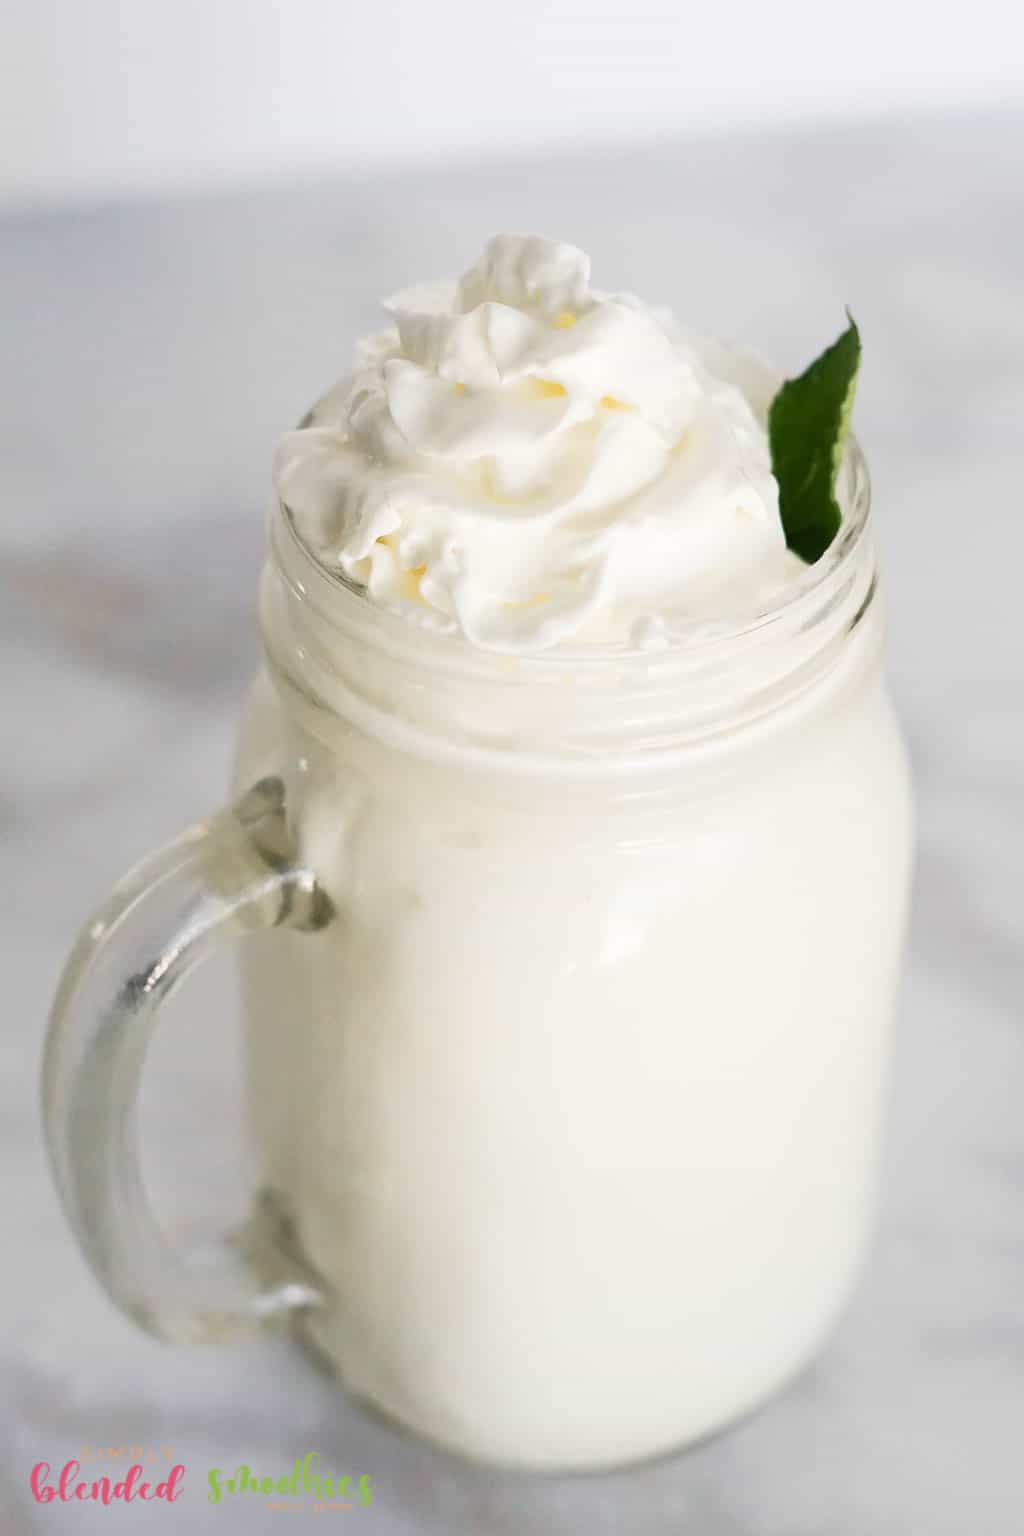 Vanilla Frappe With Whipped Cream And Mint Leaf